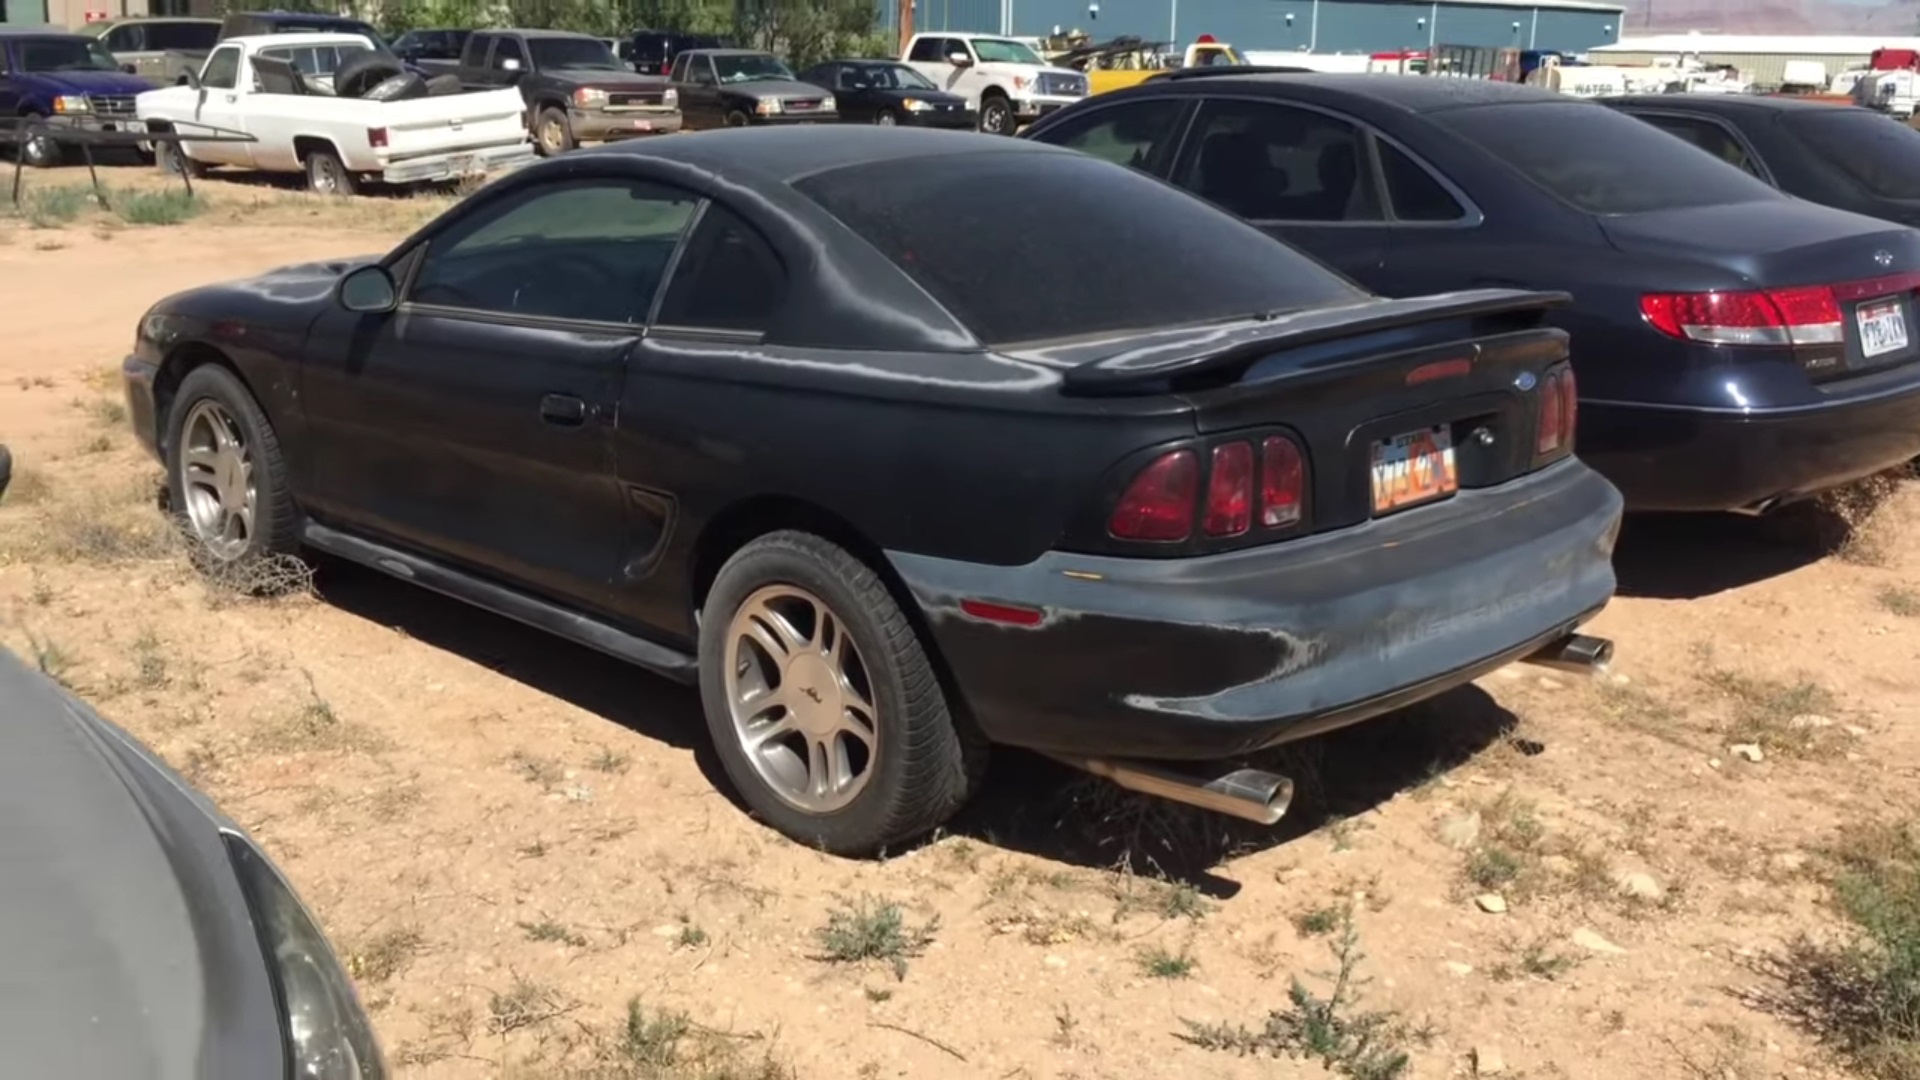 Video: Old 1997 Ford Mustang GT Overview